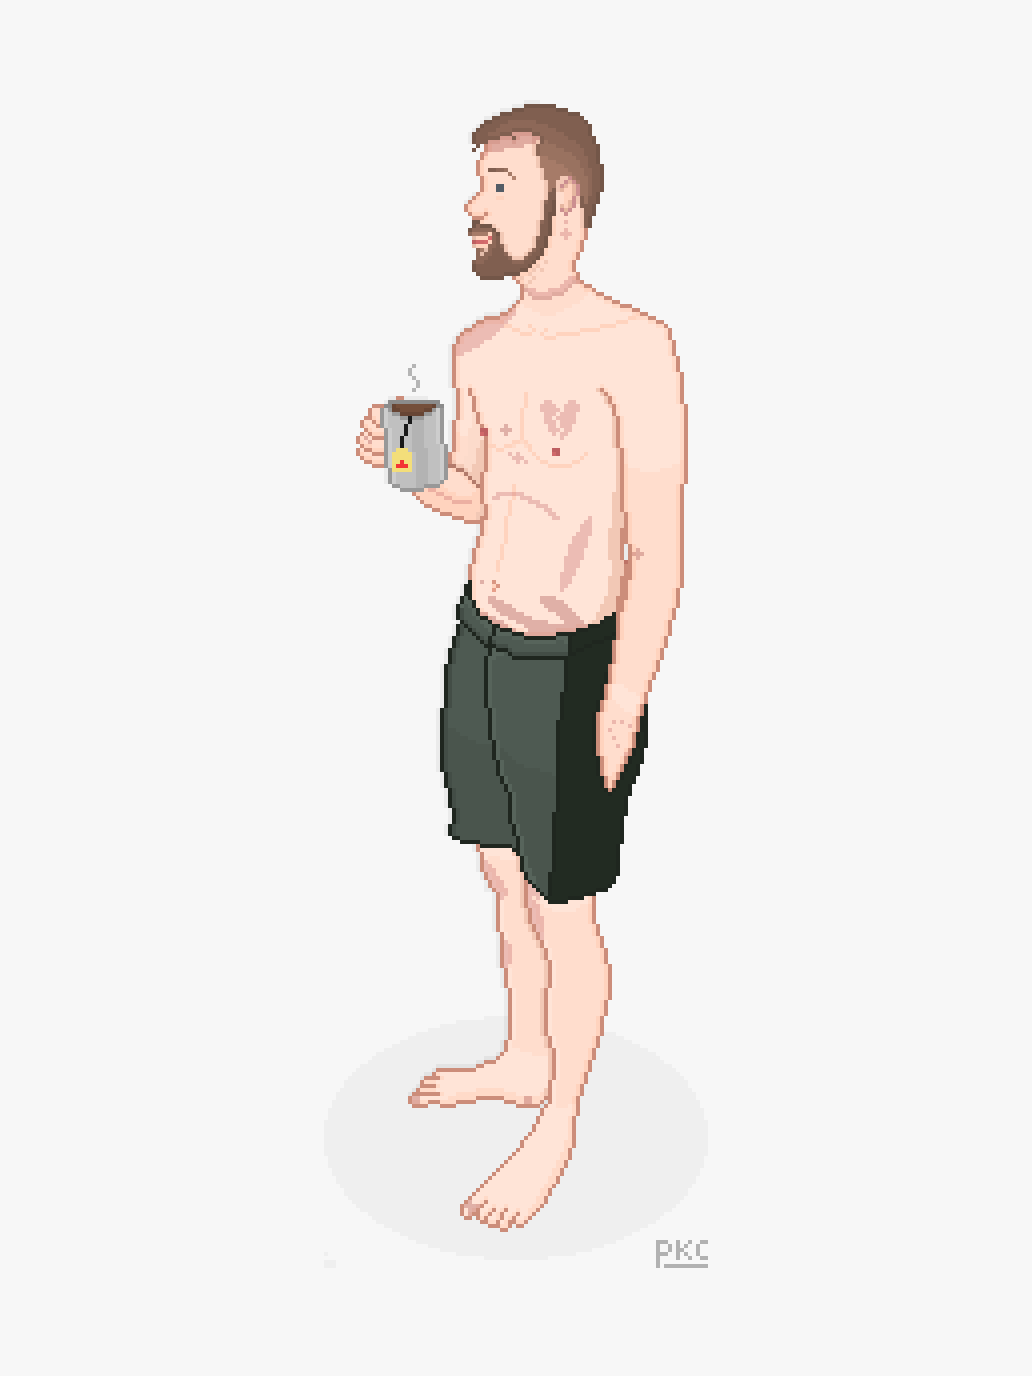 Me, relaxed, holding a cup of tea, mostly nude, with my scars visible